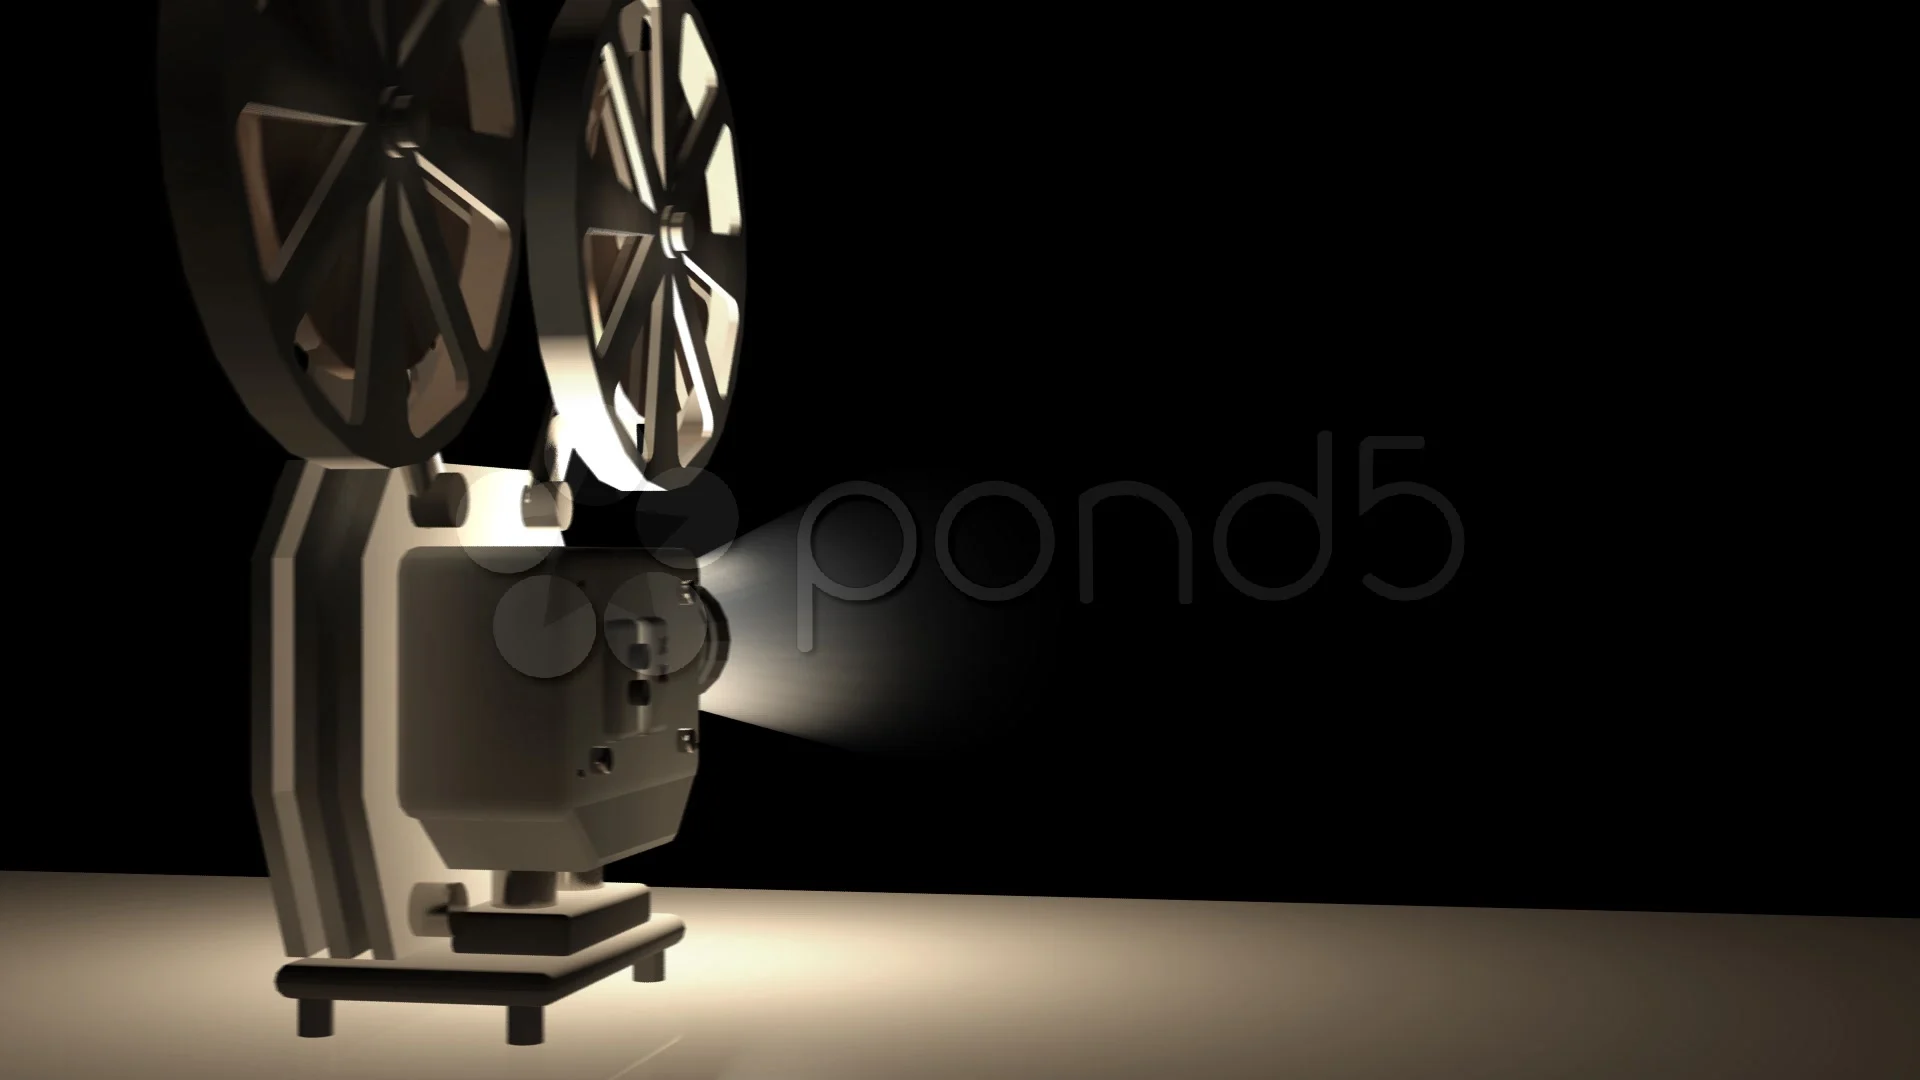 Old 8mm film projector playing in the night. Close-up of a reel with a film.  by Moon Soul. Photo stock - StudioNow